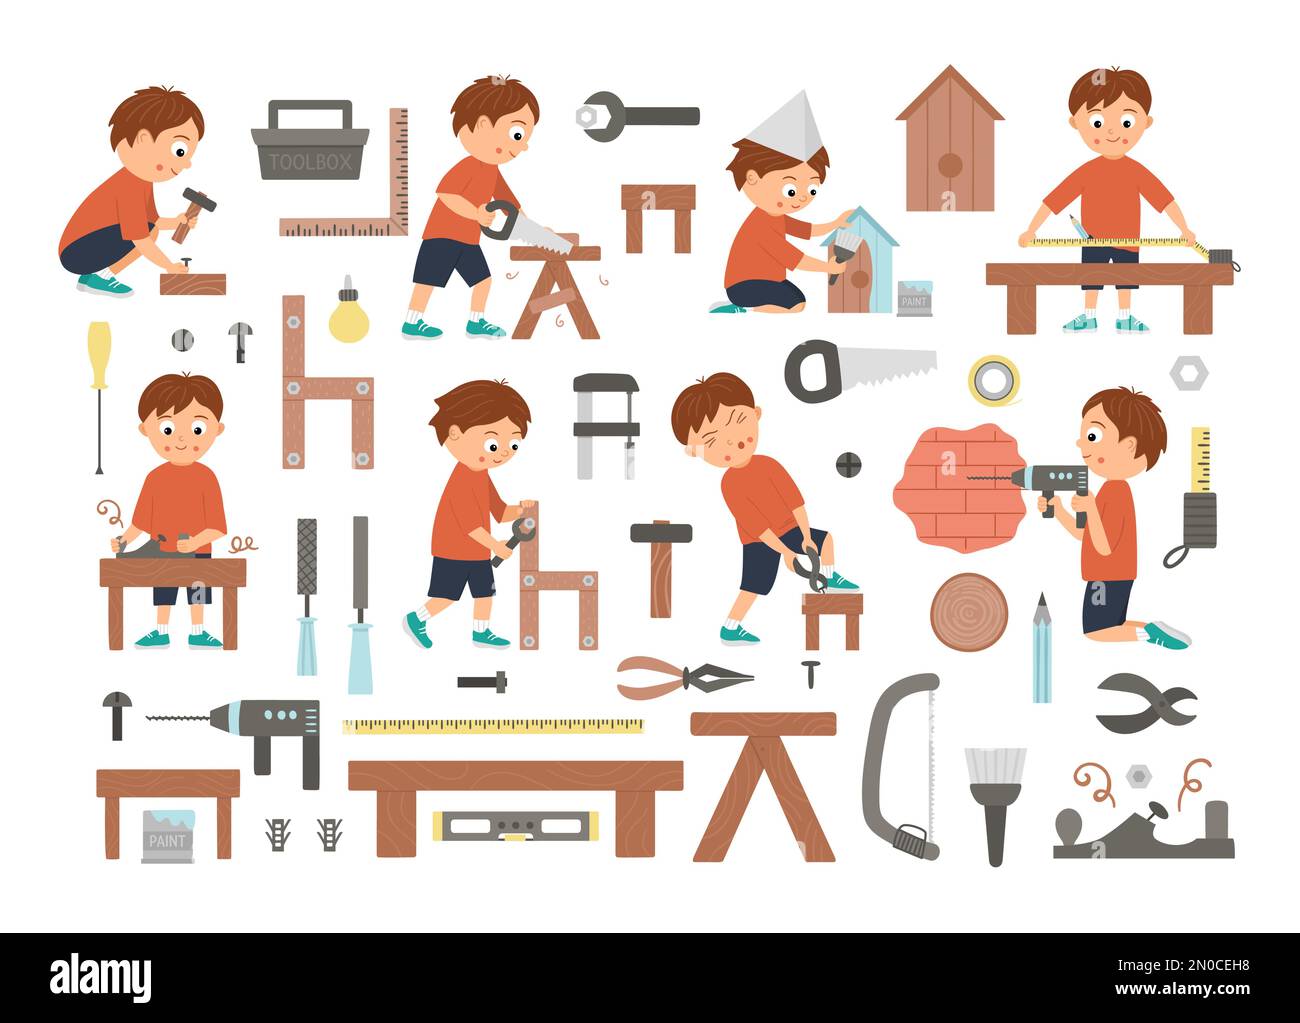 Vector set of boys doing carpenter, building or wood work and tools. Flat funny kid character sawing, nailing up, measuring, drilling a wall, screwing Stock Vector